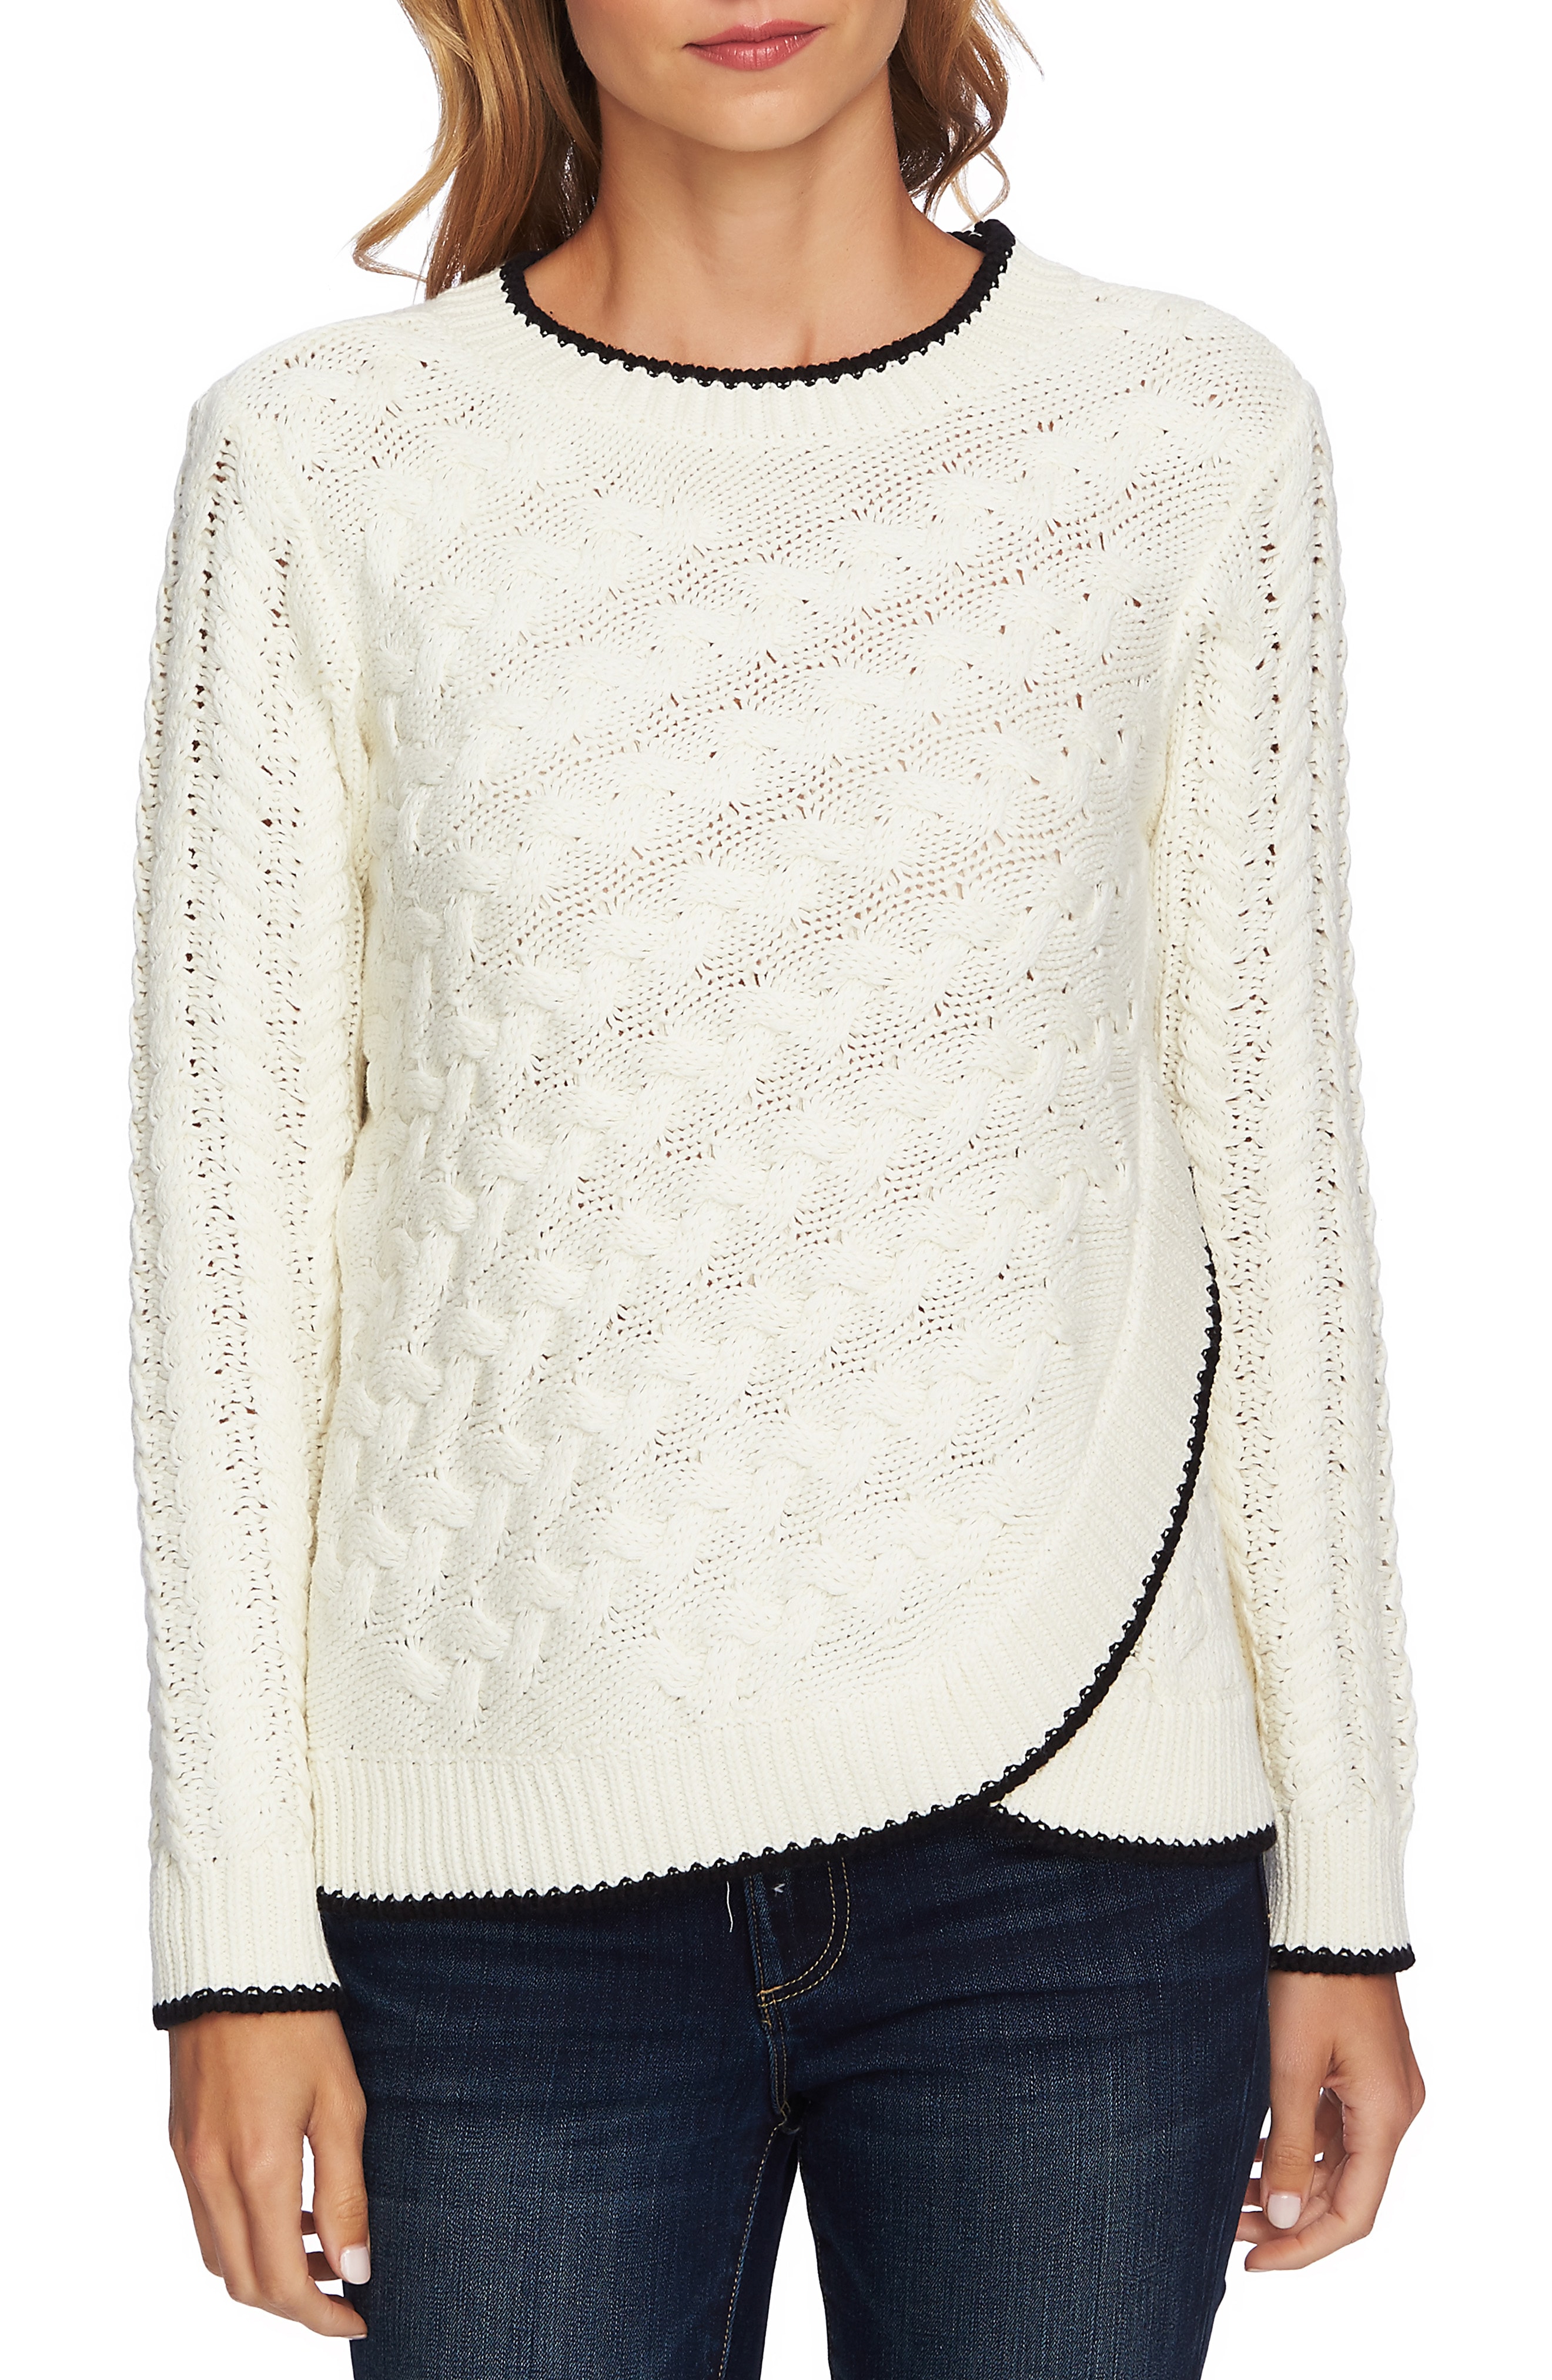 CeCe Cable Knit Overlay Cotton Sweater